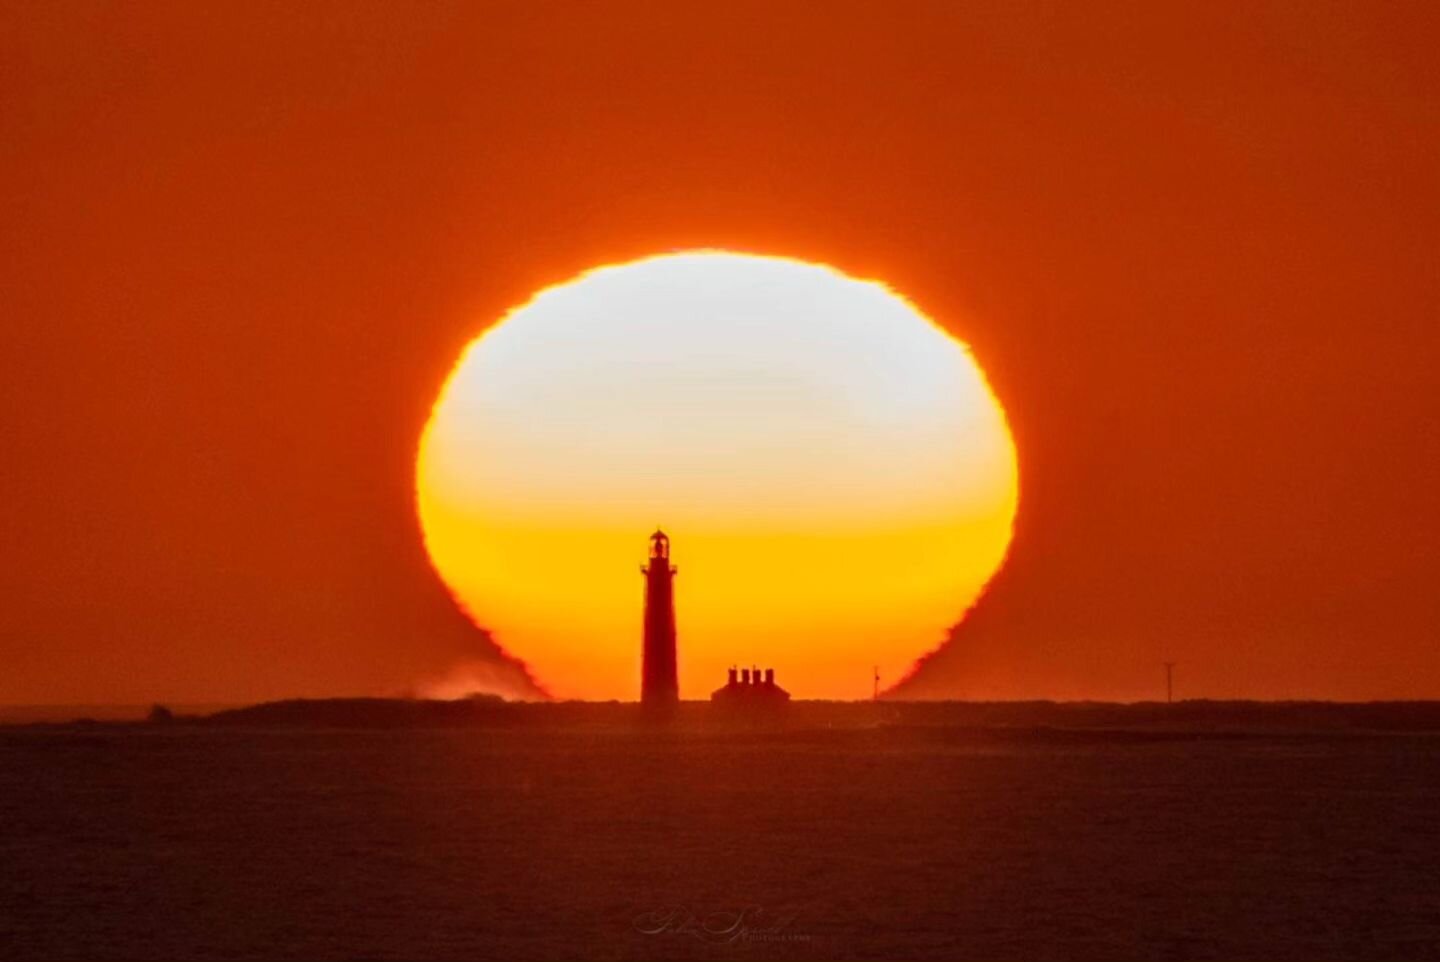 The sun setting behind Inisheer Lighthouse on the Aran Islands. The earth's atmosphere fairly distorts the sun and it almost looks fake with the shape as it got lower. Planned with @photopills but still a bit of running to keep it all lined up. #aran